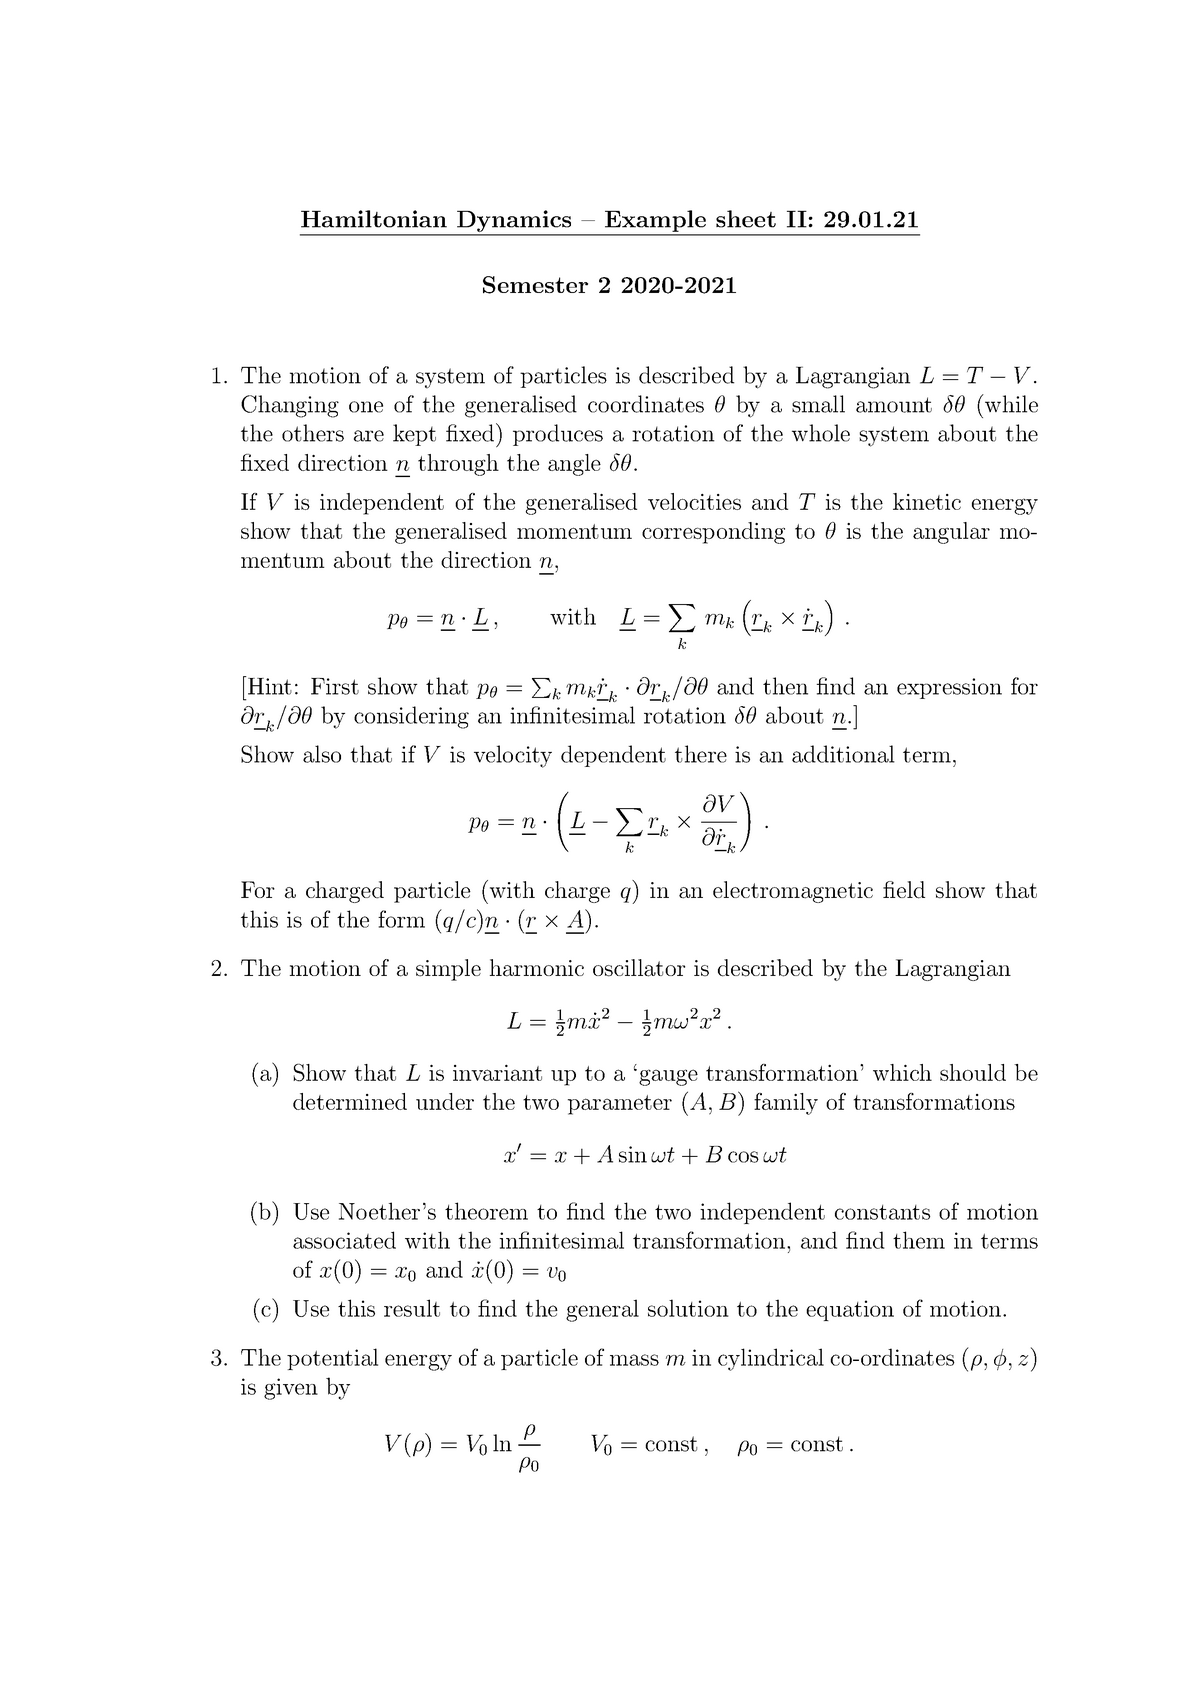 Hamiltonian Dynamics Problem Sheet 2 Hamiltonian Dynamics Example Sheet Ii 29 01 Semester The Motion Of System Of Particles Is Described By Lagrangianl Studocu